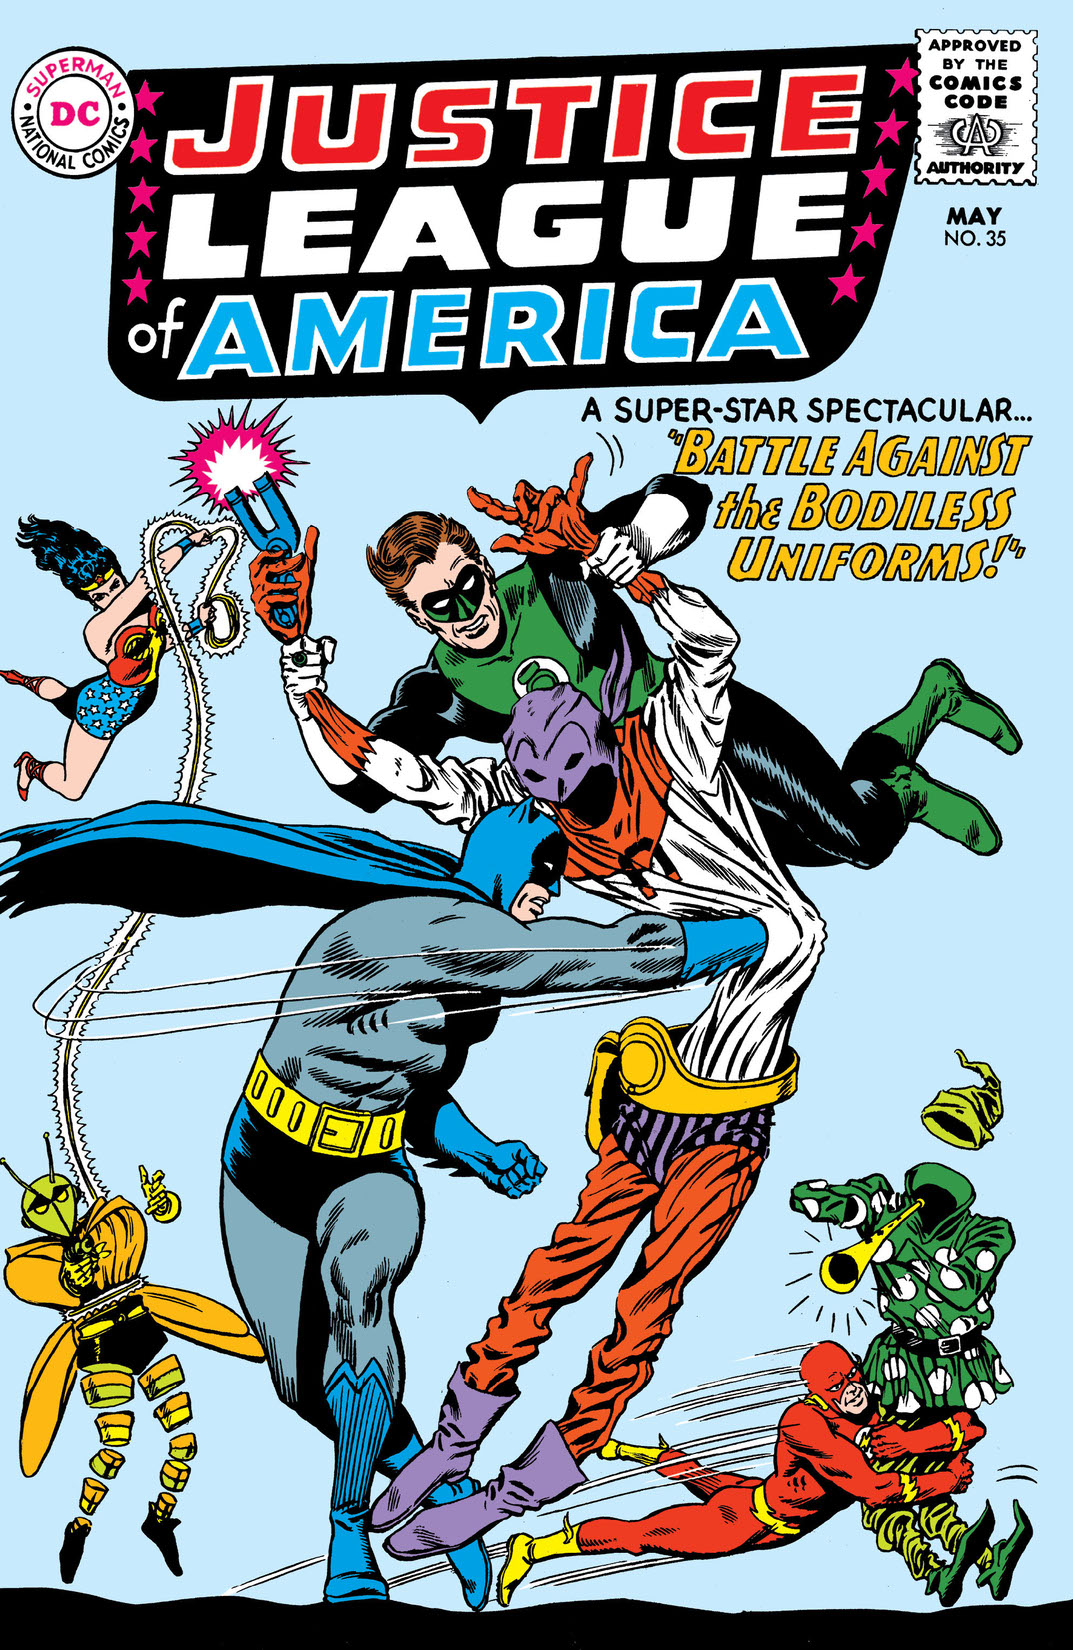 Justice League of America (1960-) #35 preview images